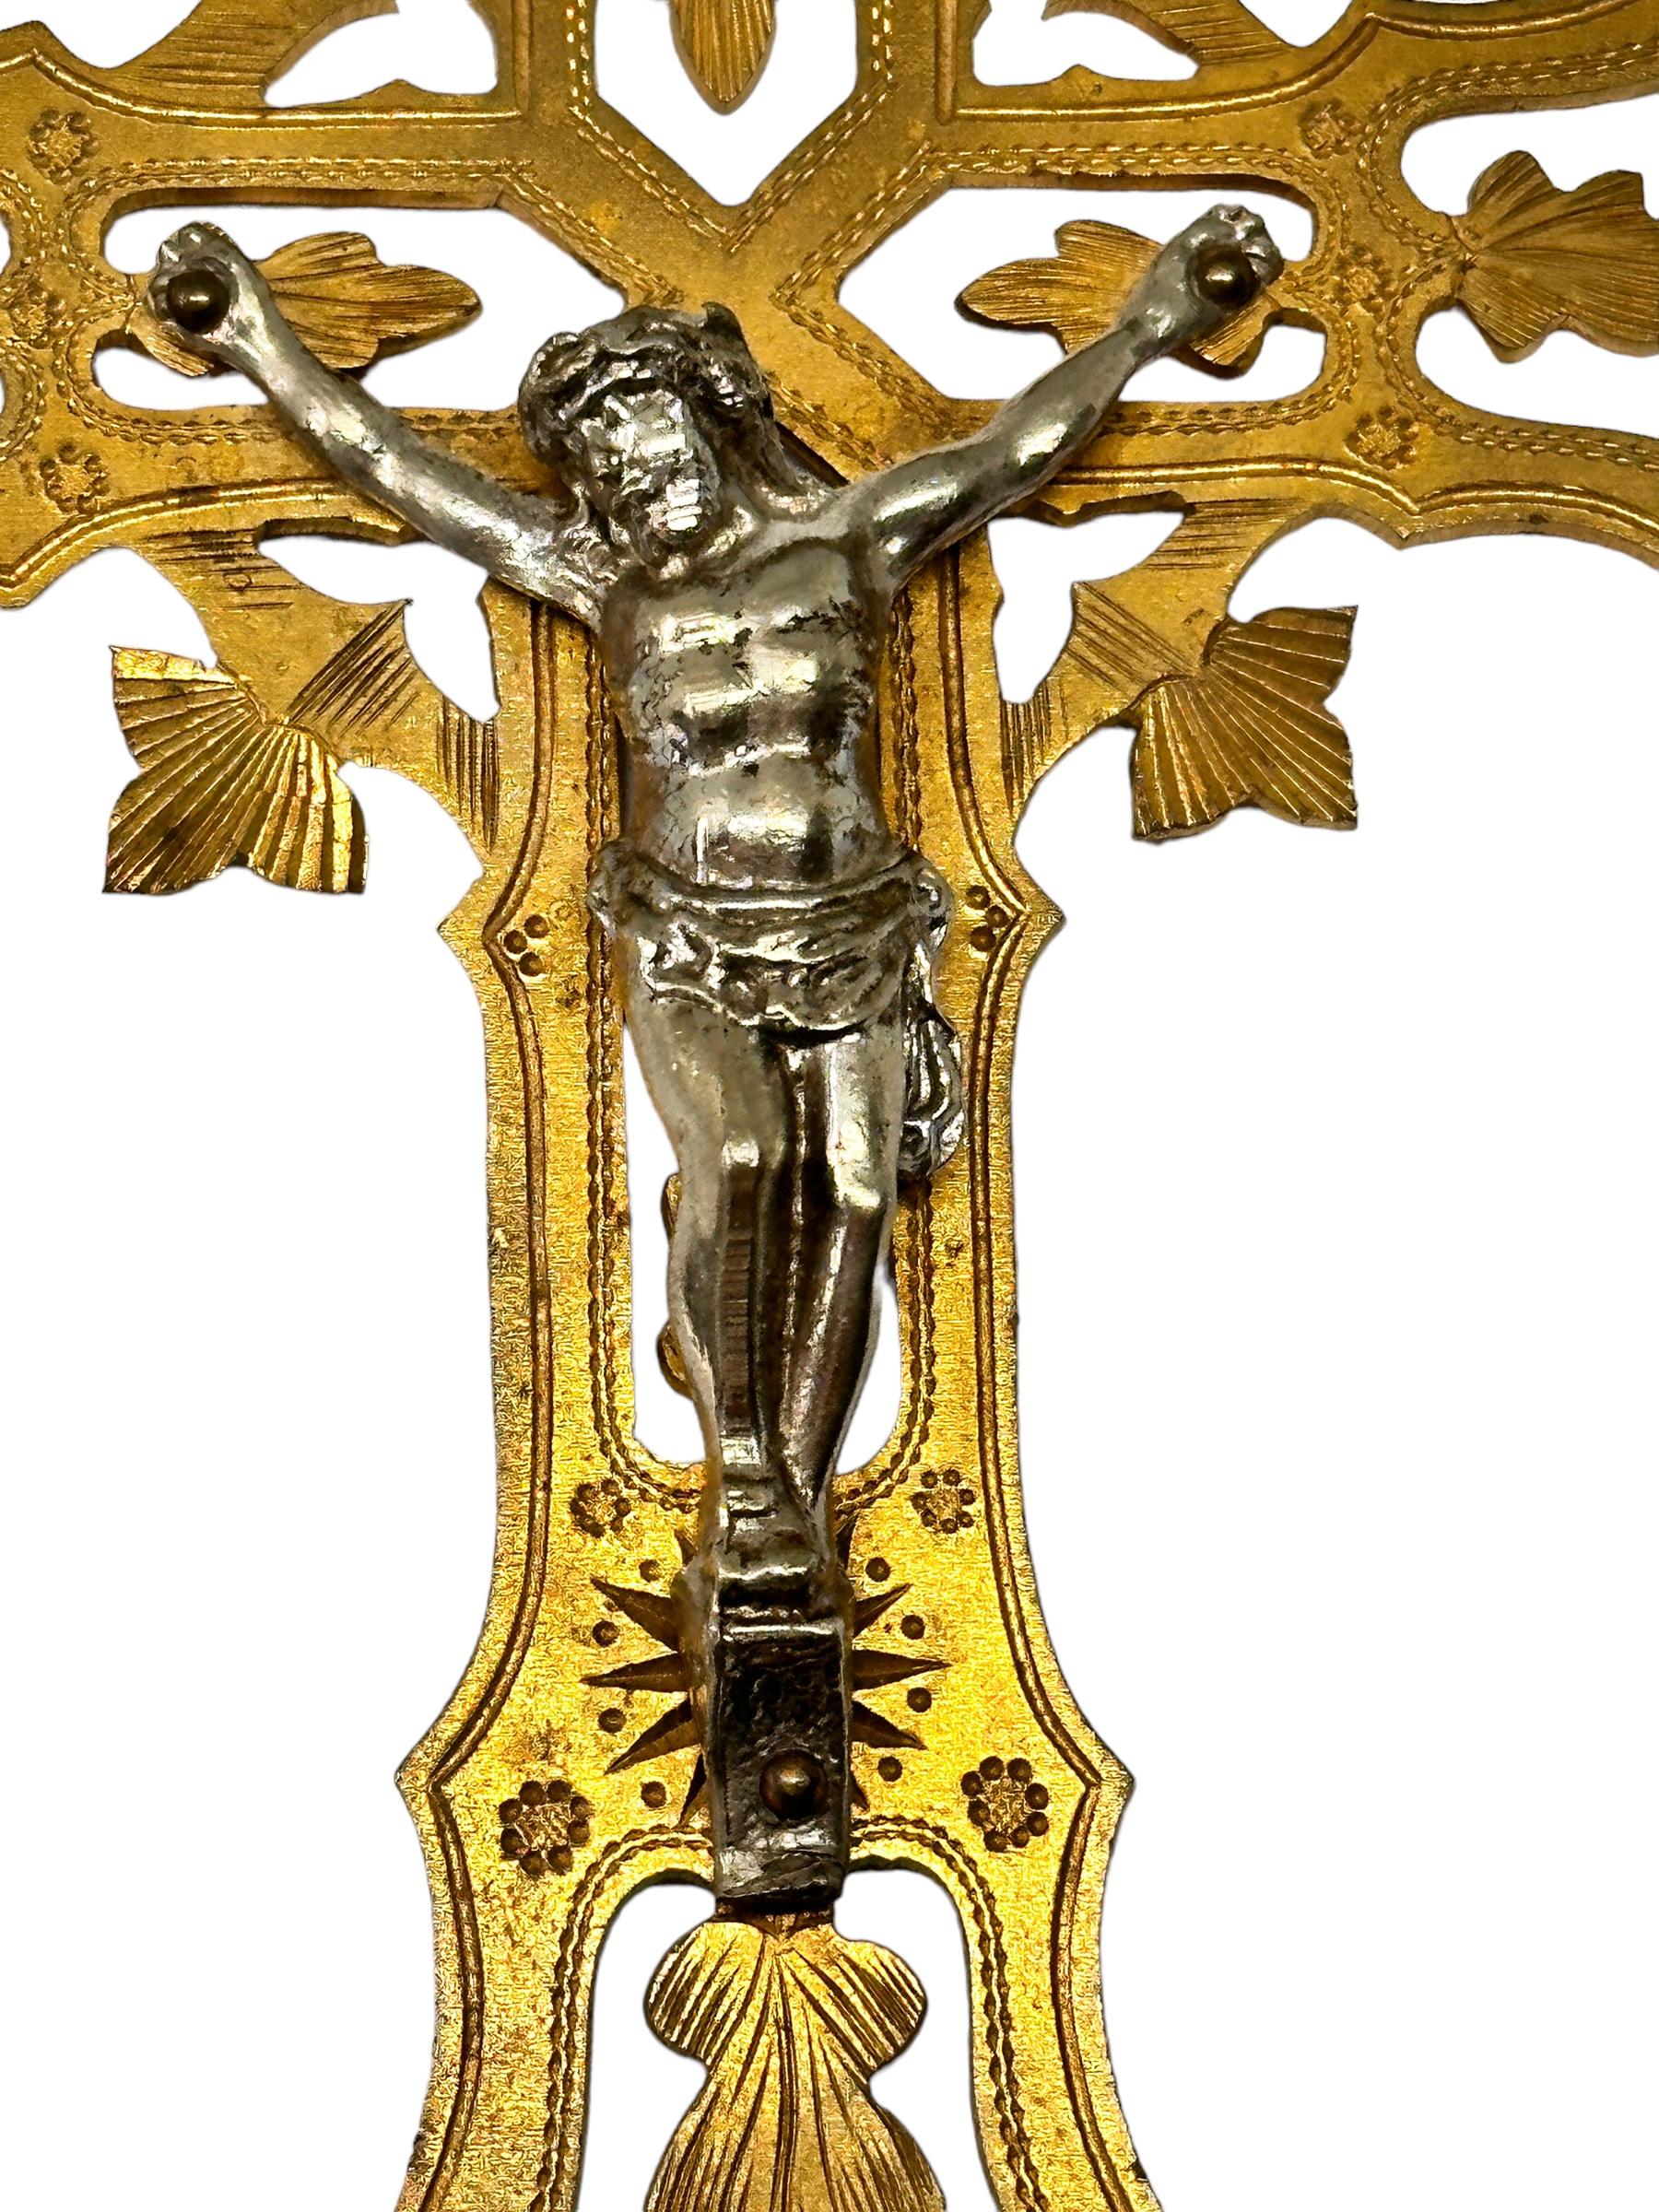 This antique Cross Pendant is hand made of metal. It looks very beautiful and will be a nice item on your wall or just do place it in your collection of relics and christianity items.
This will look great with your collection. As you know, Relics